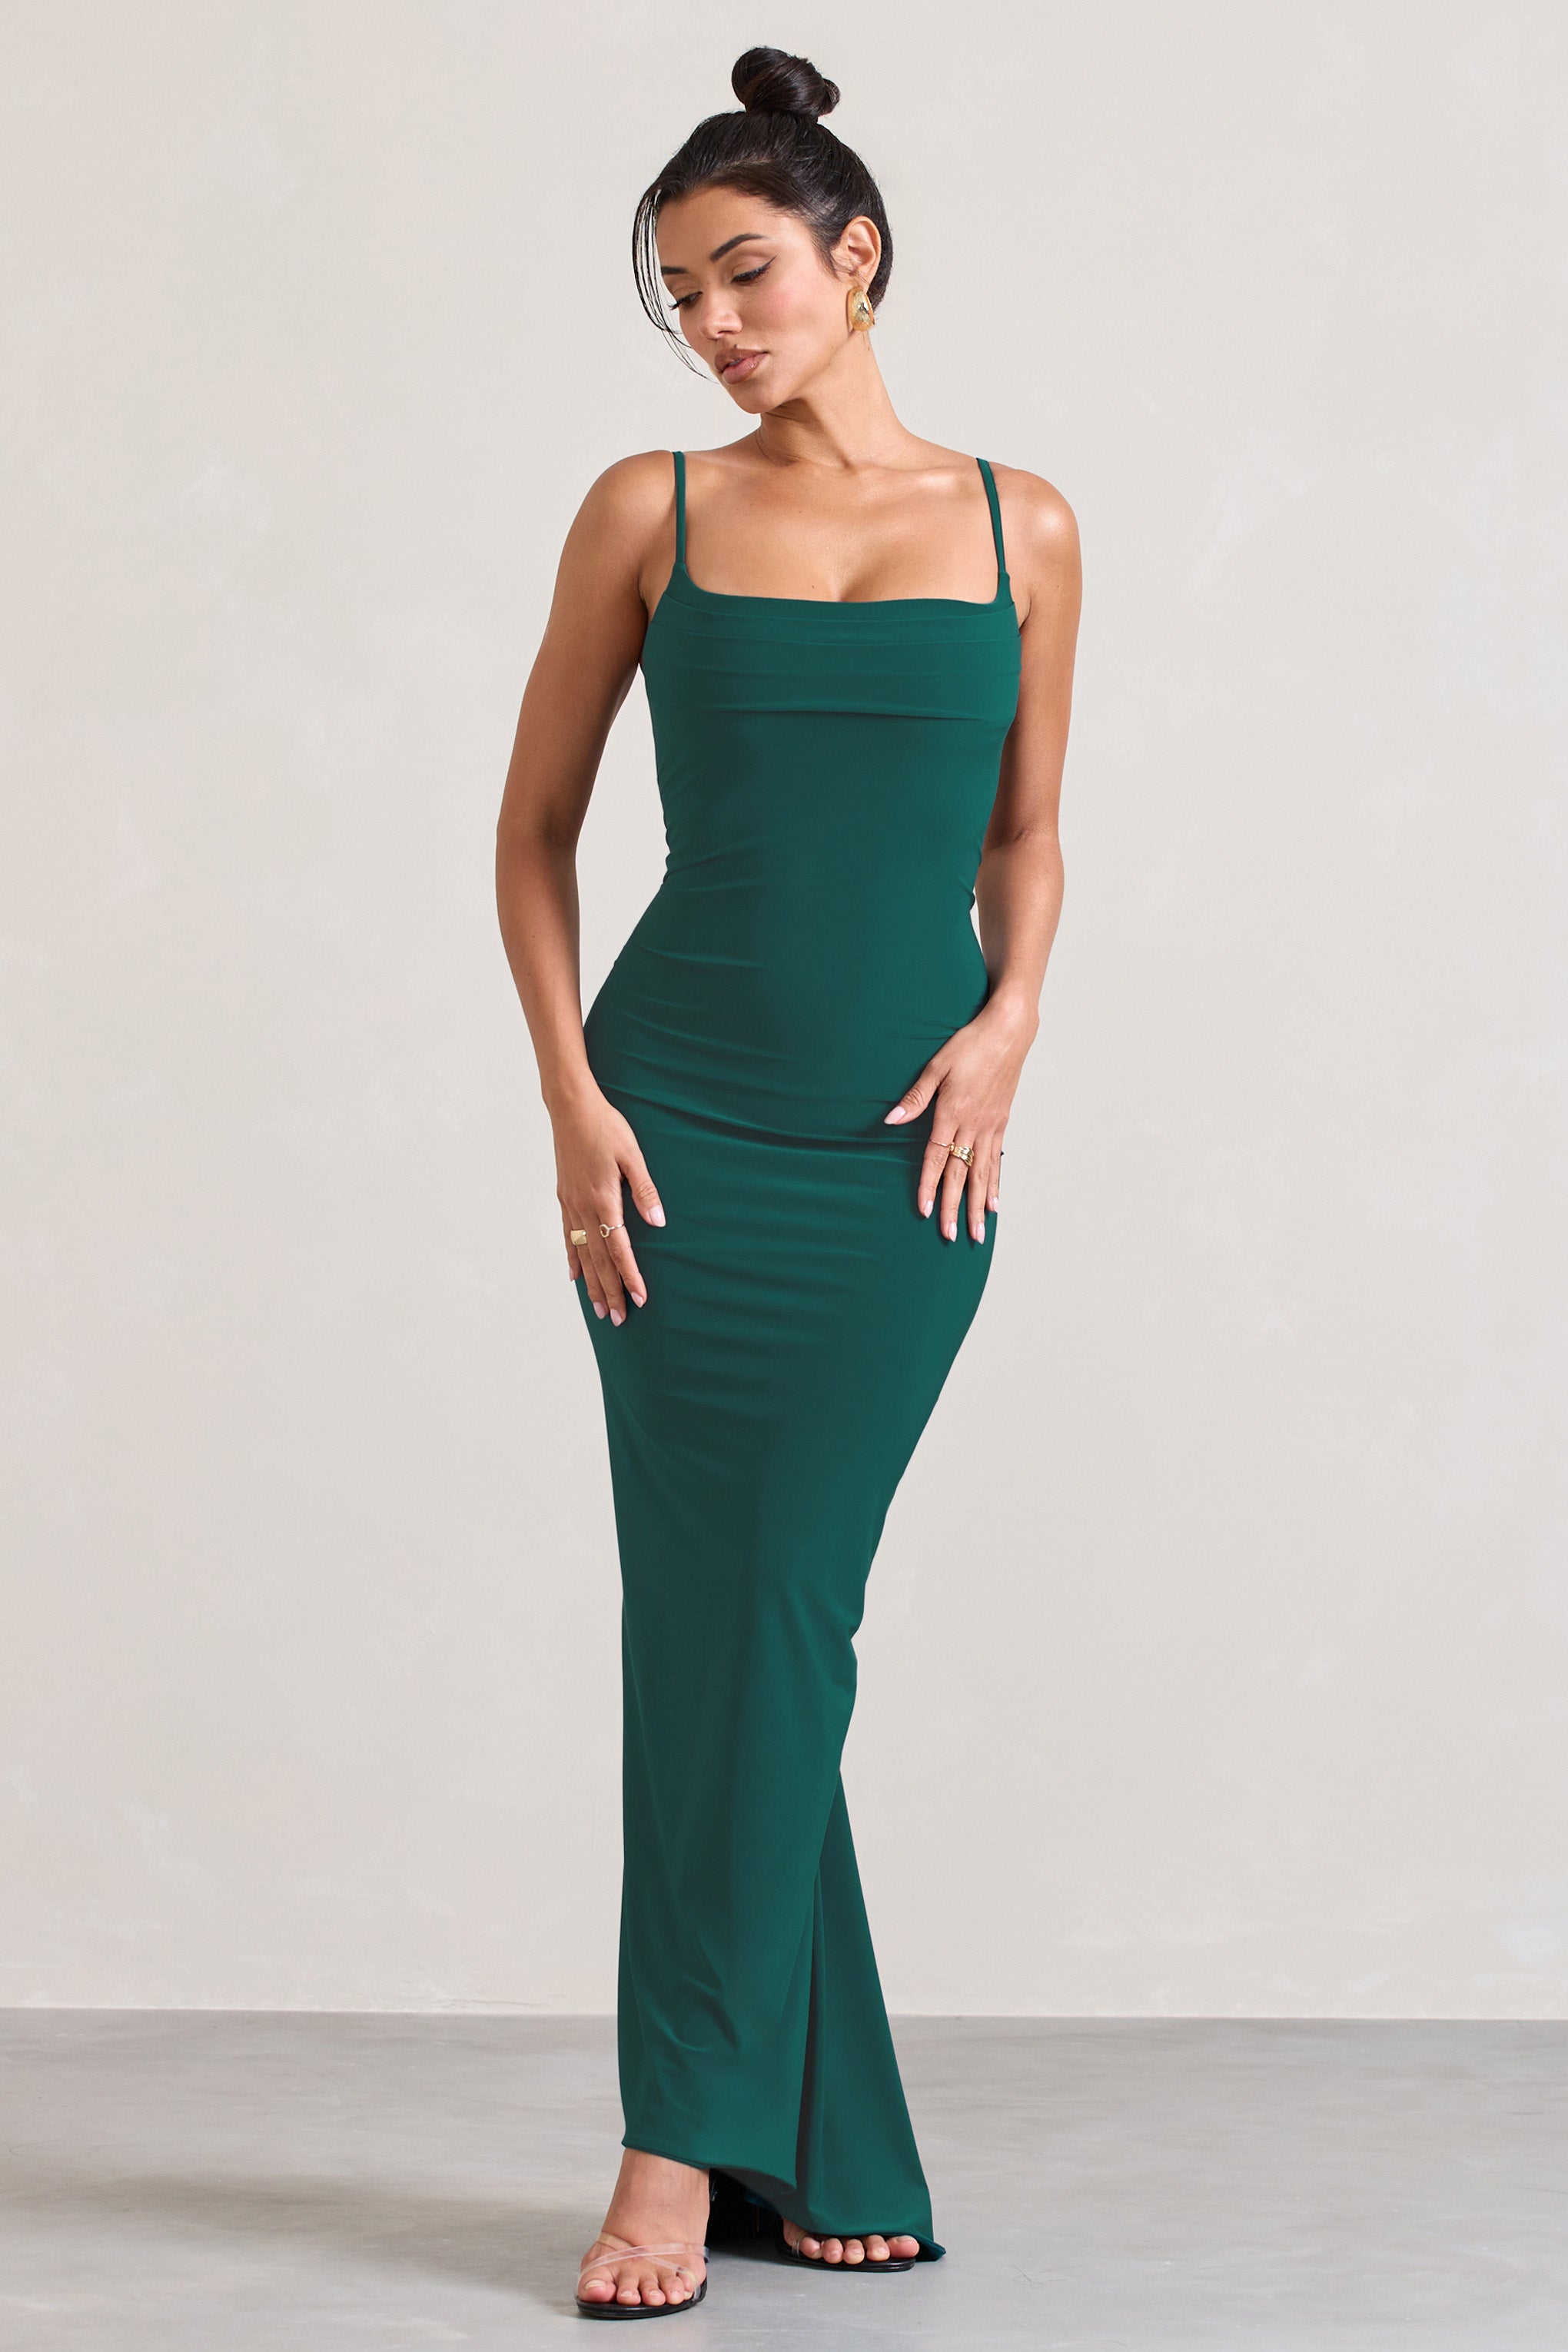 Camera One Bottle Green Strappy Laced Bodycon Maxi Dress